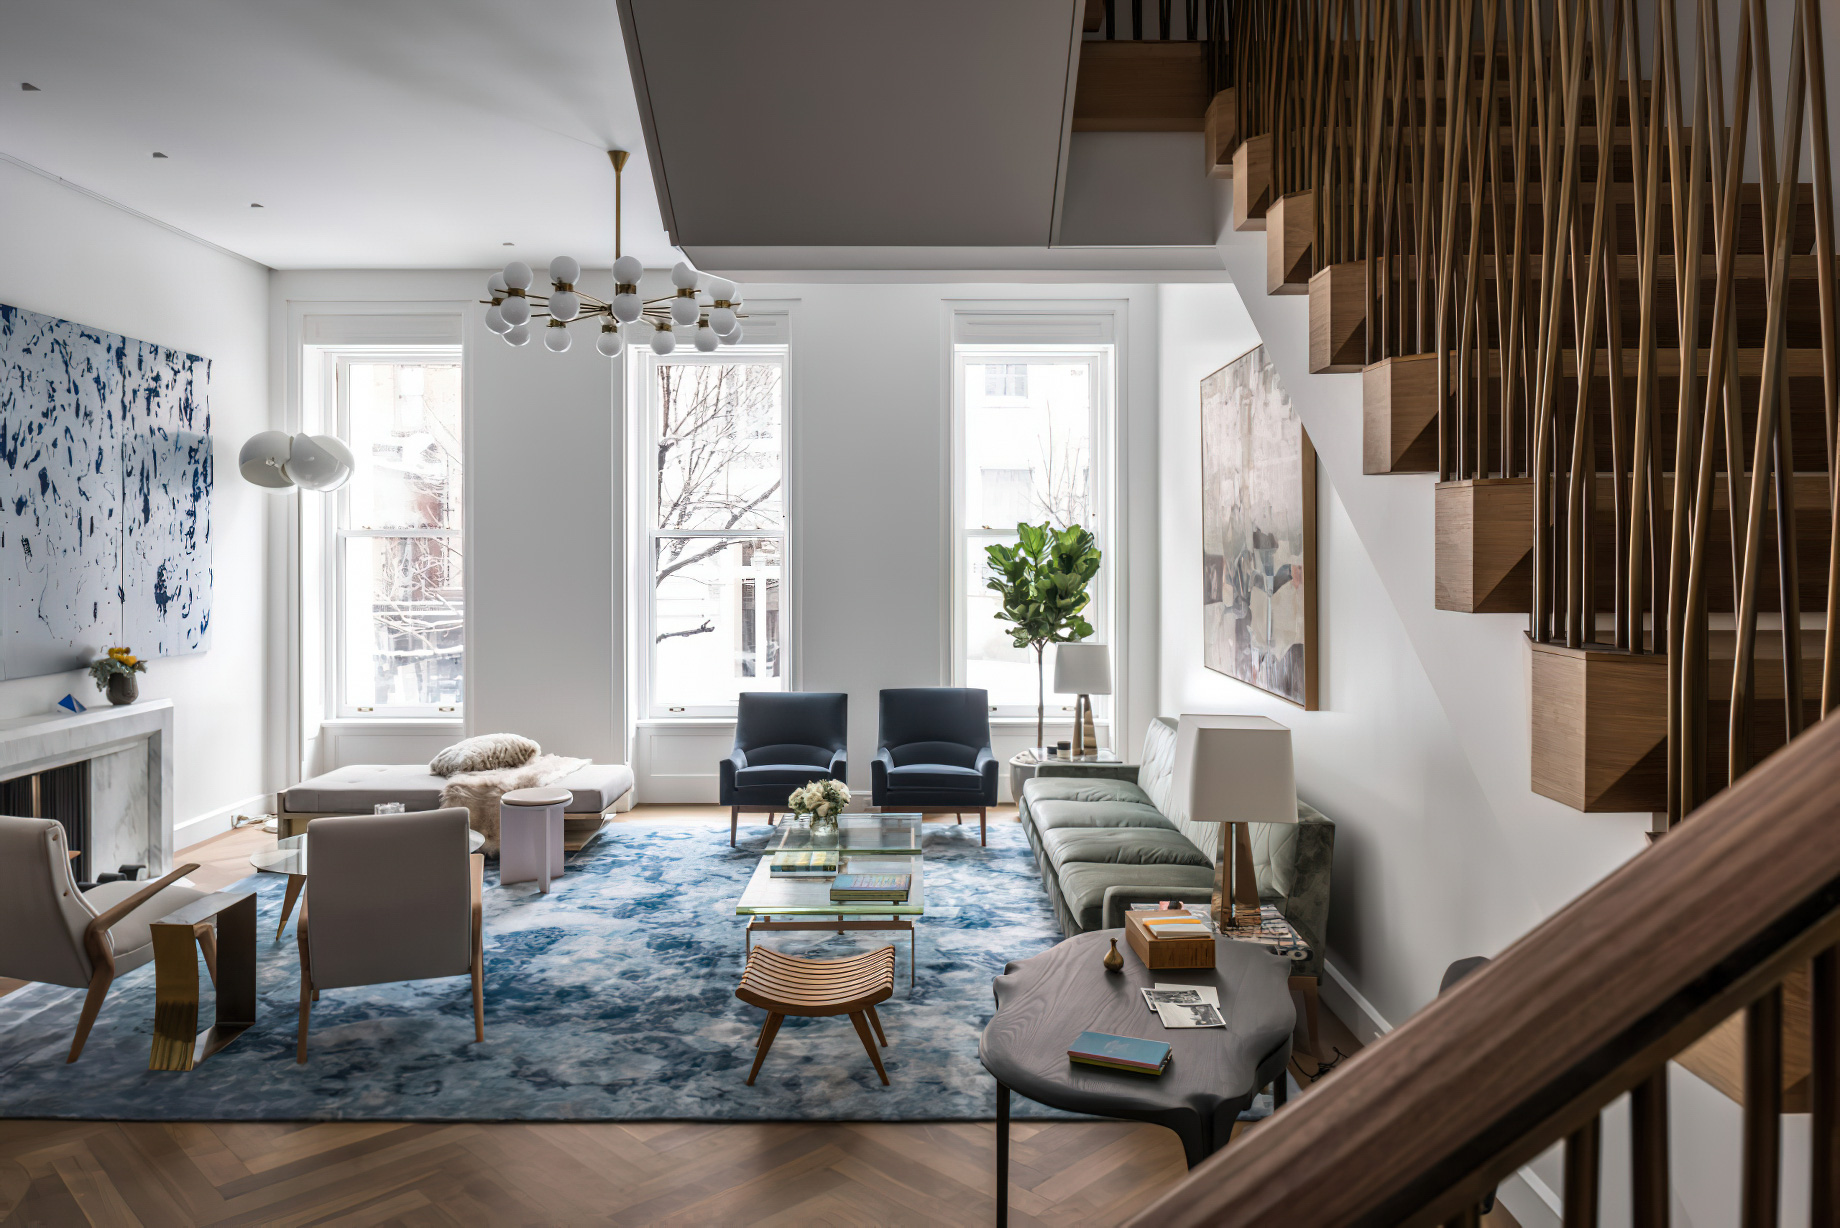 Upper East Side Townhouse Interior New York, NY, USA – Michael K Chen